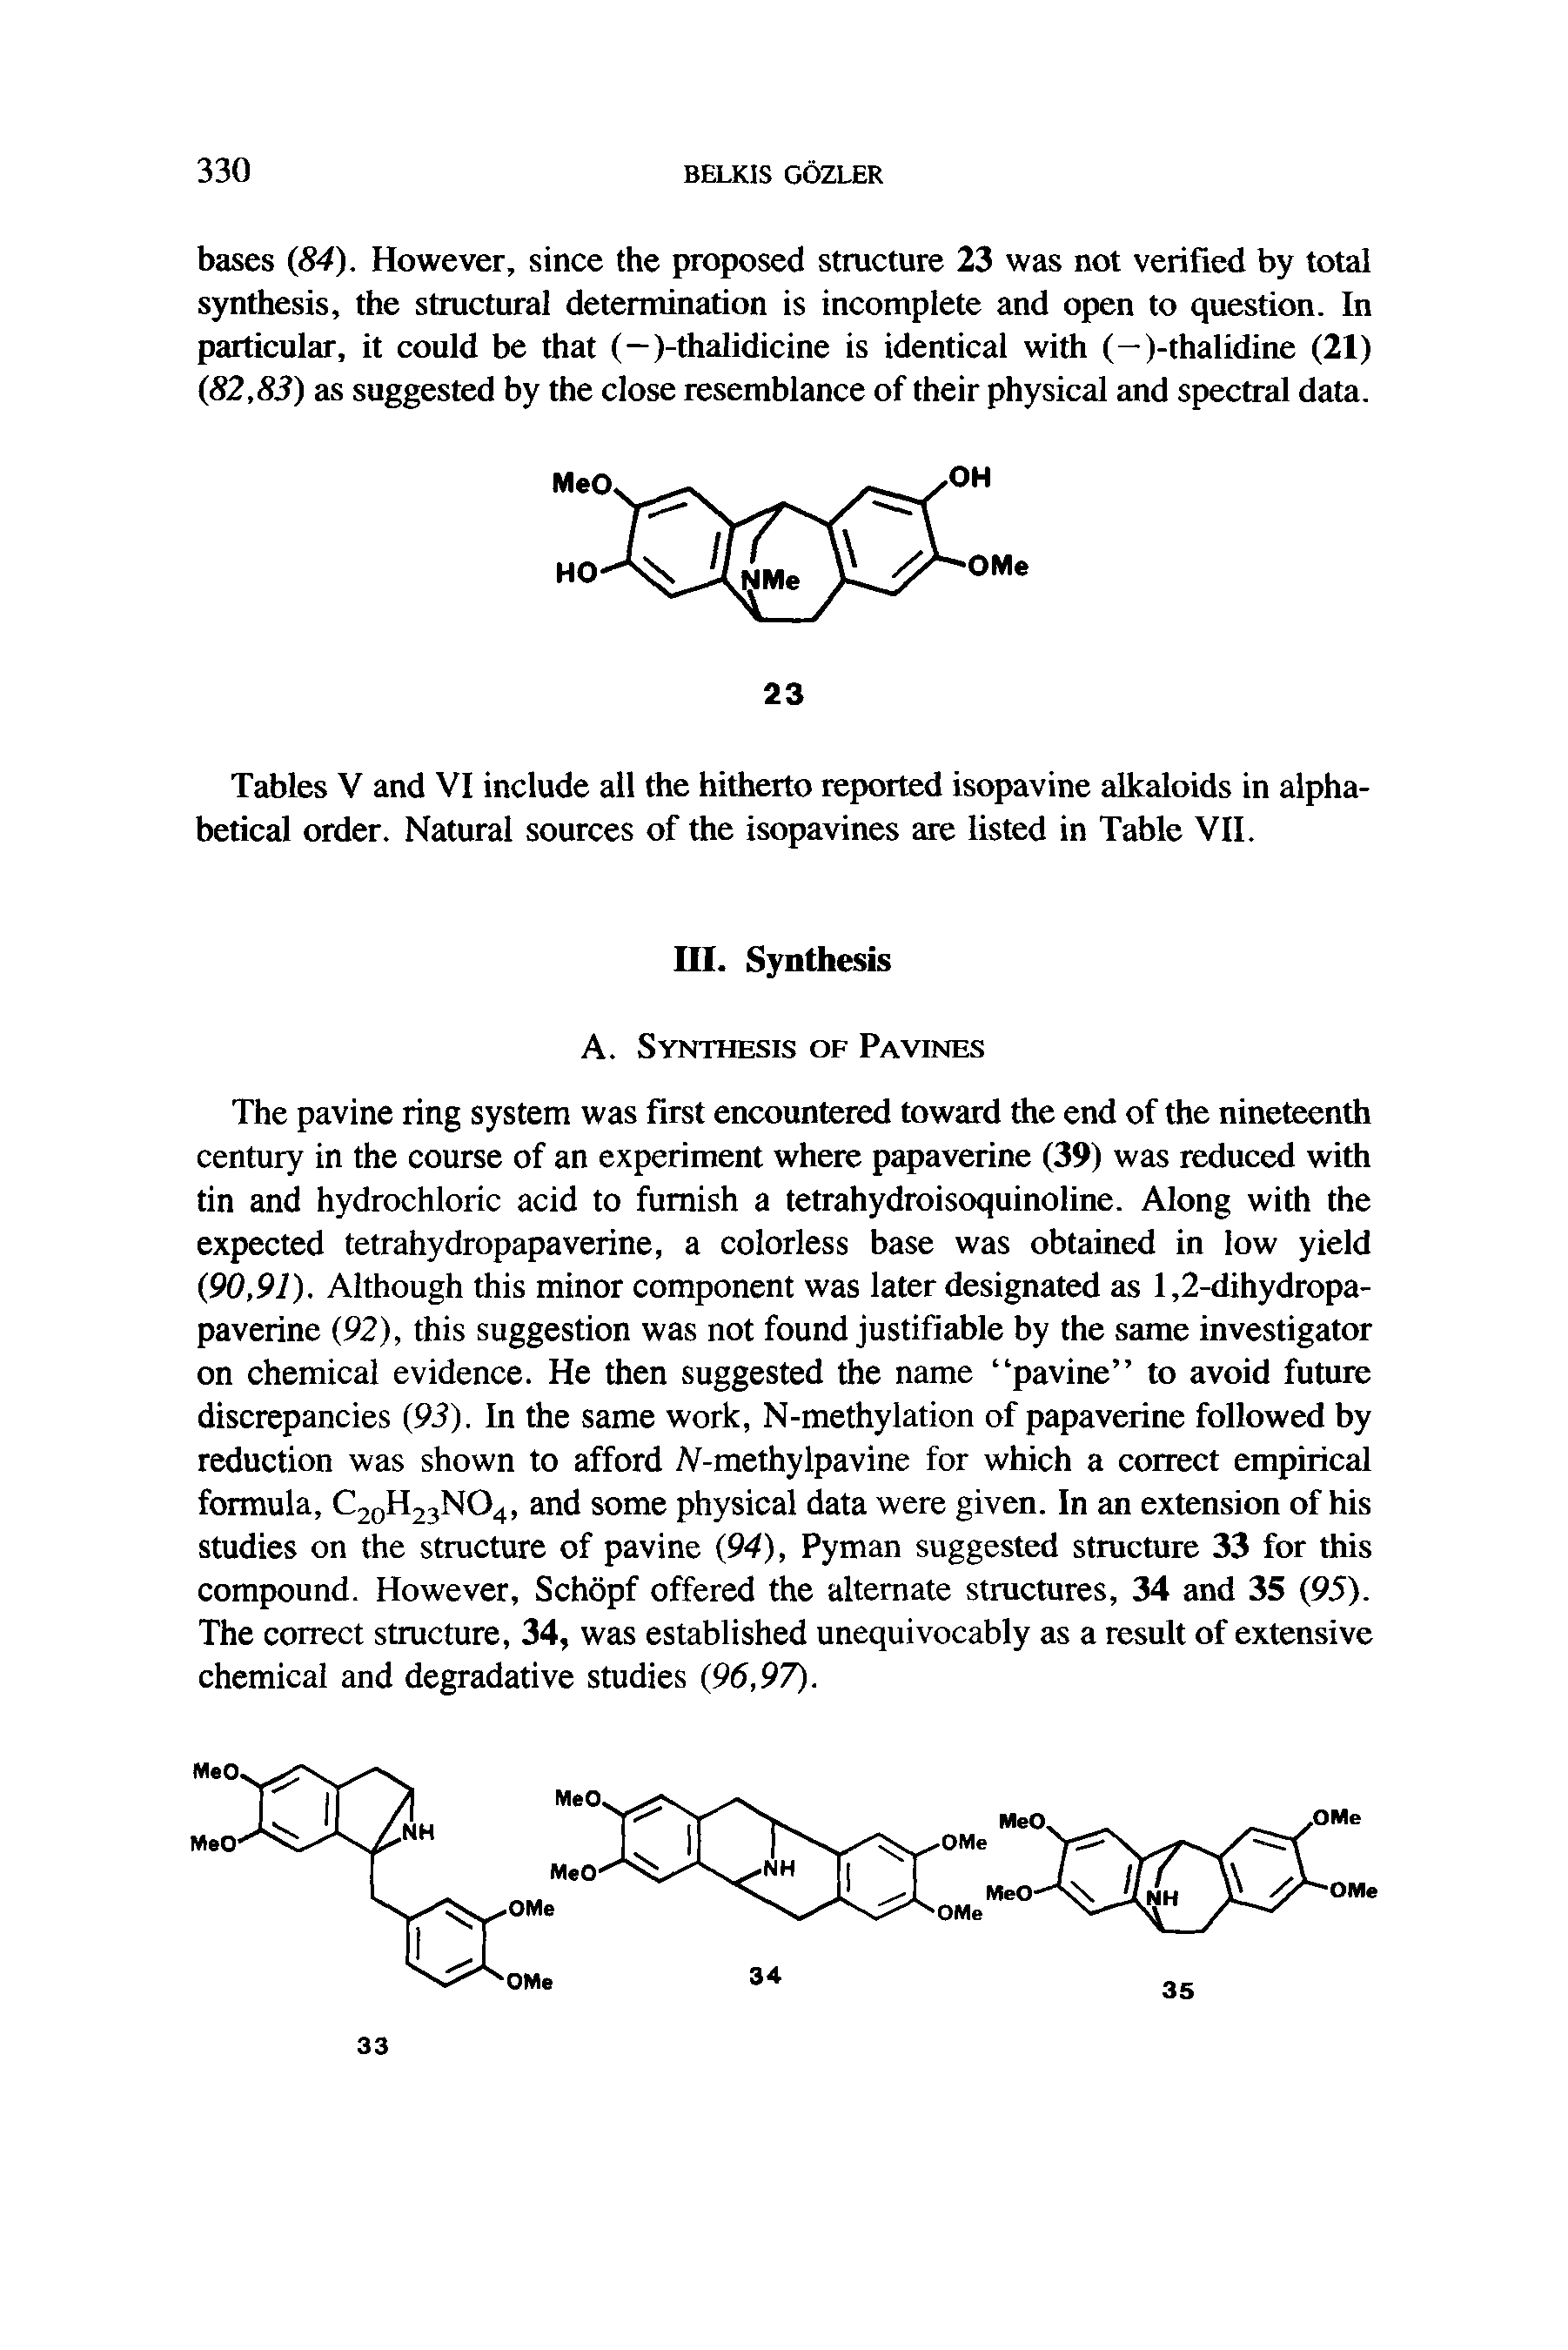 Tables V and VI include all the hitherto reported isopavine alkaloids in alphabetical order. Natural sources of the isopavines are listed in Table VII.